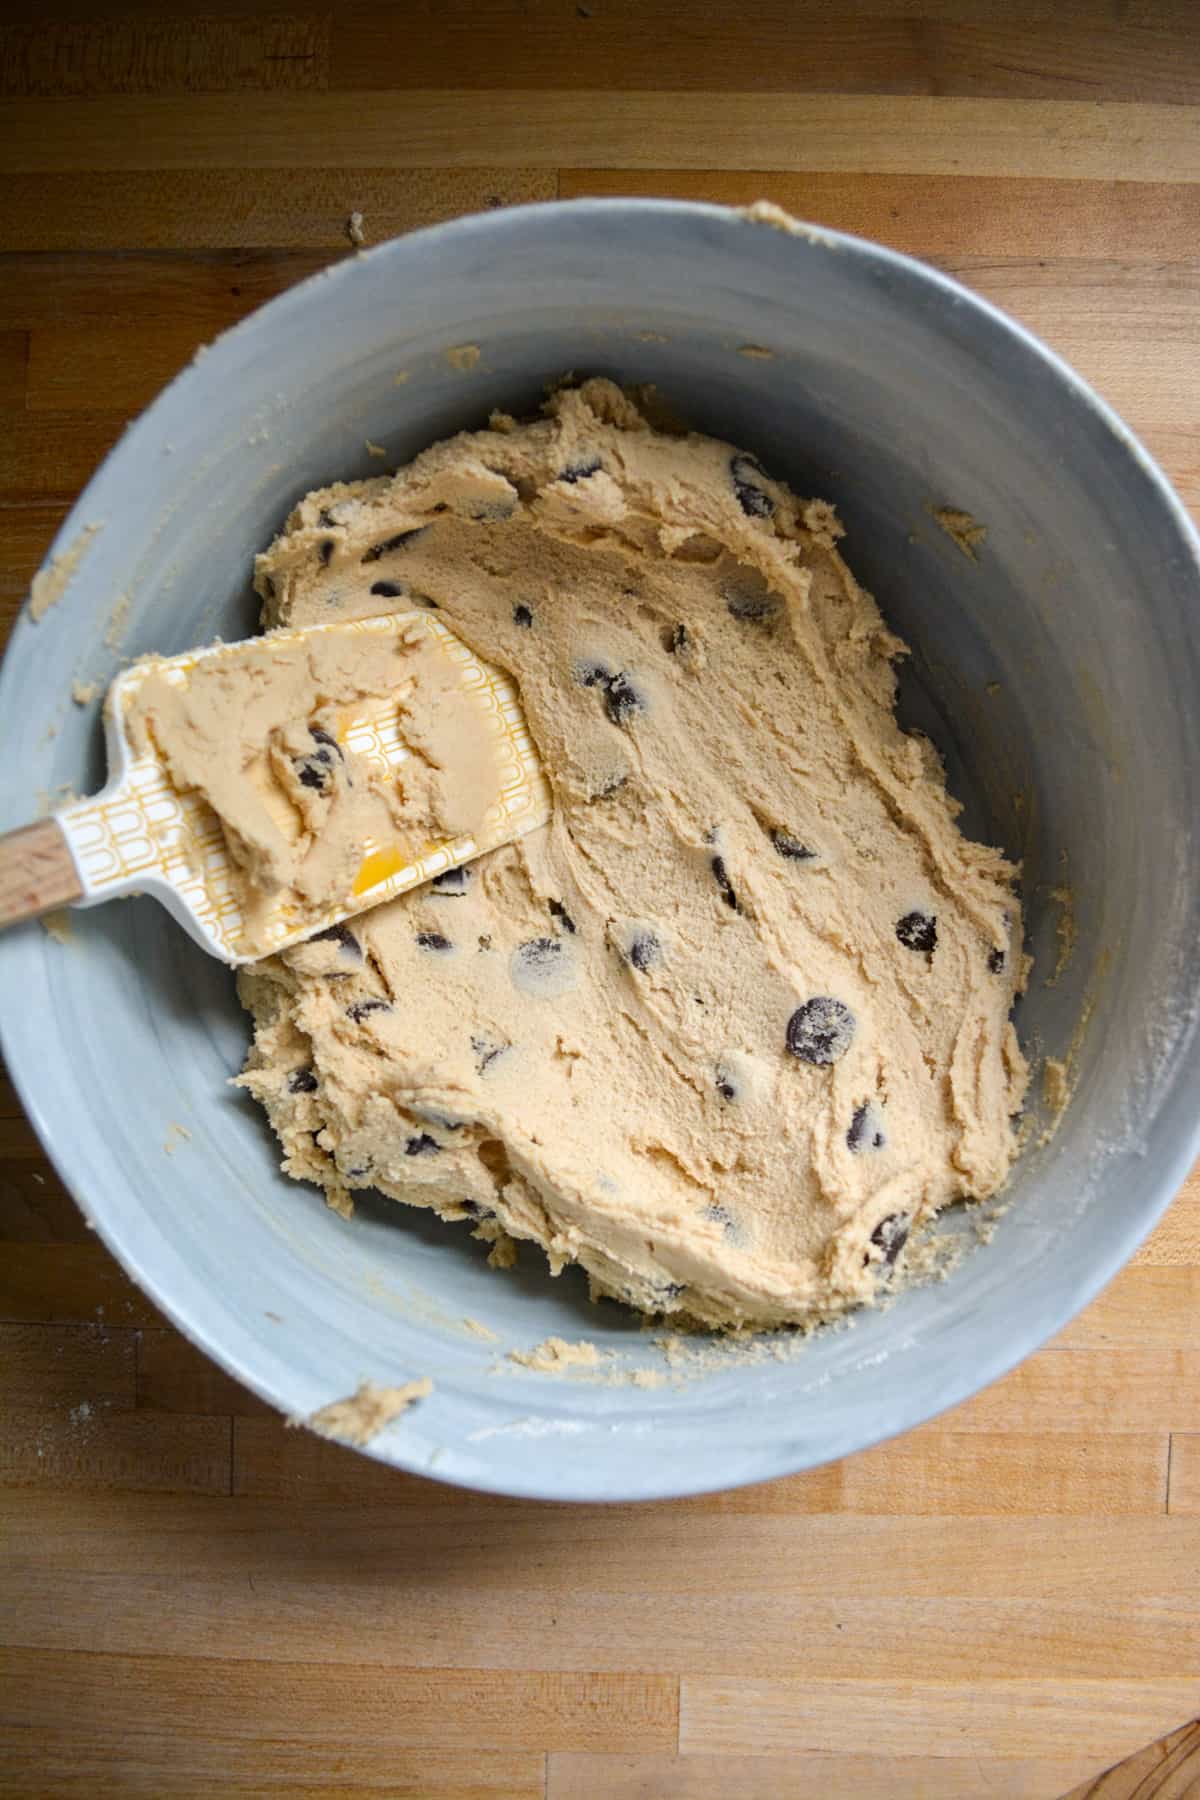 Chocolate chips are mixed into the cookie dough in a mixing bowl with a rubber spatula to the left side of the bowl.